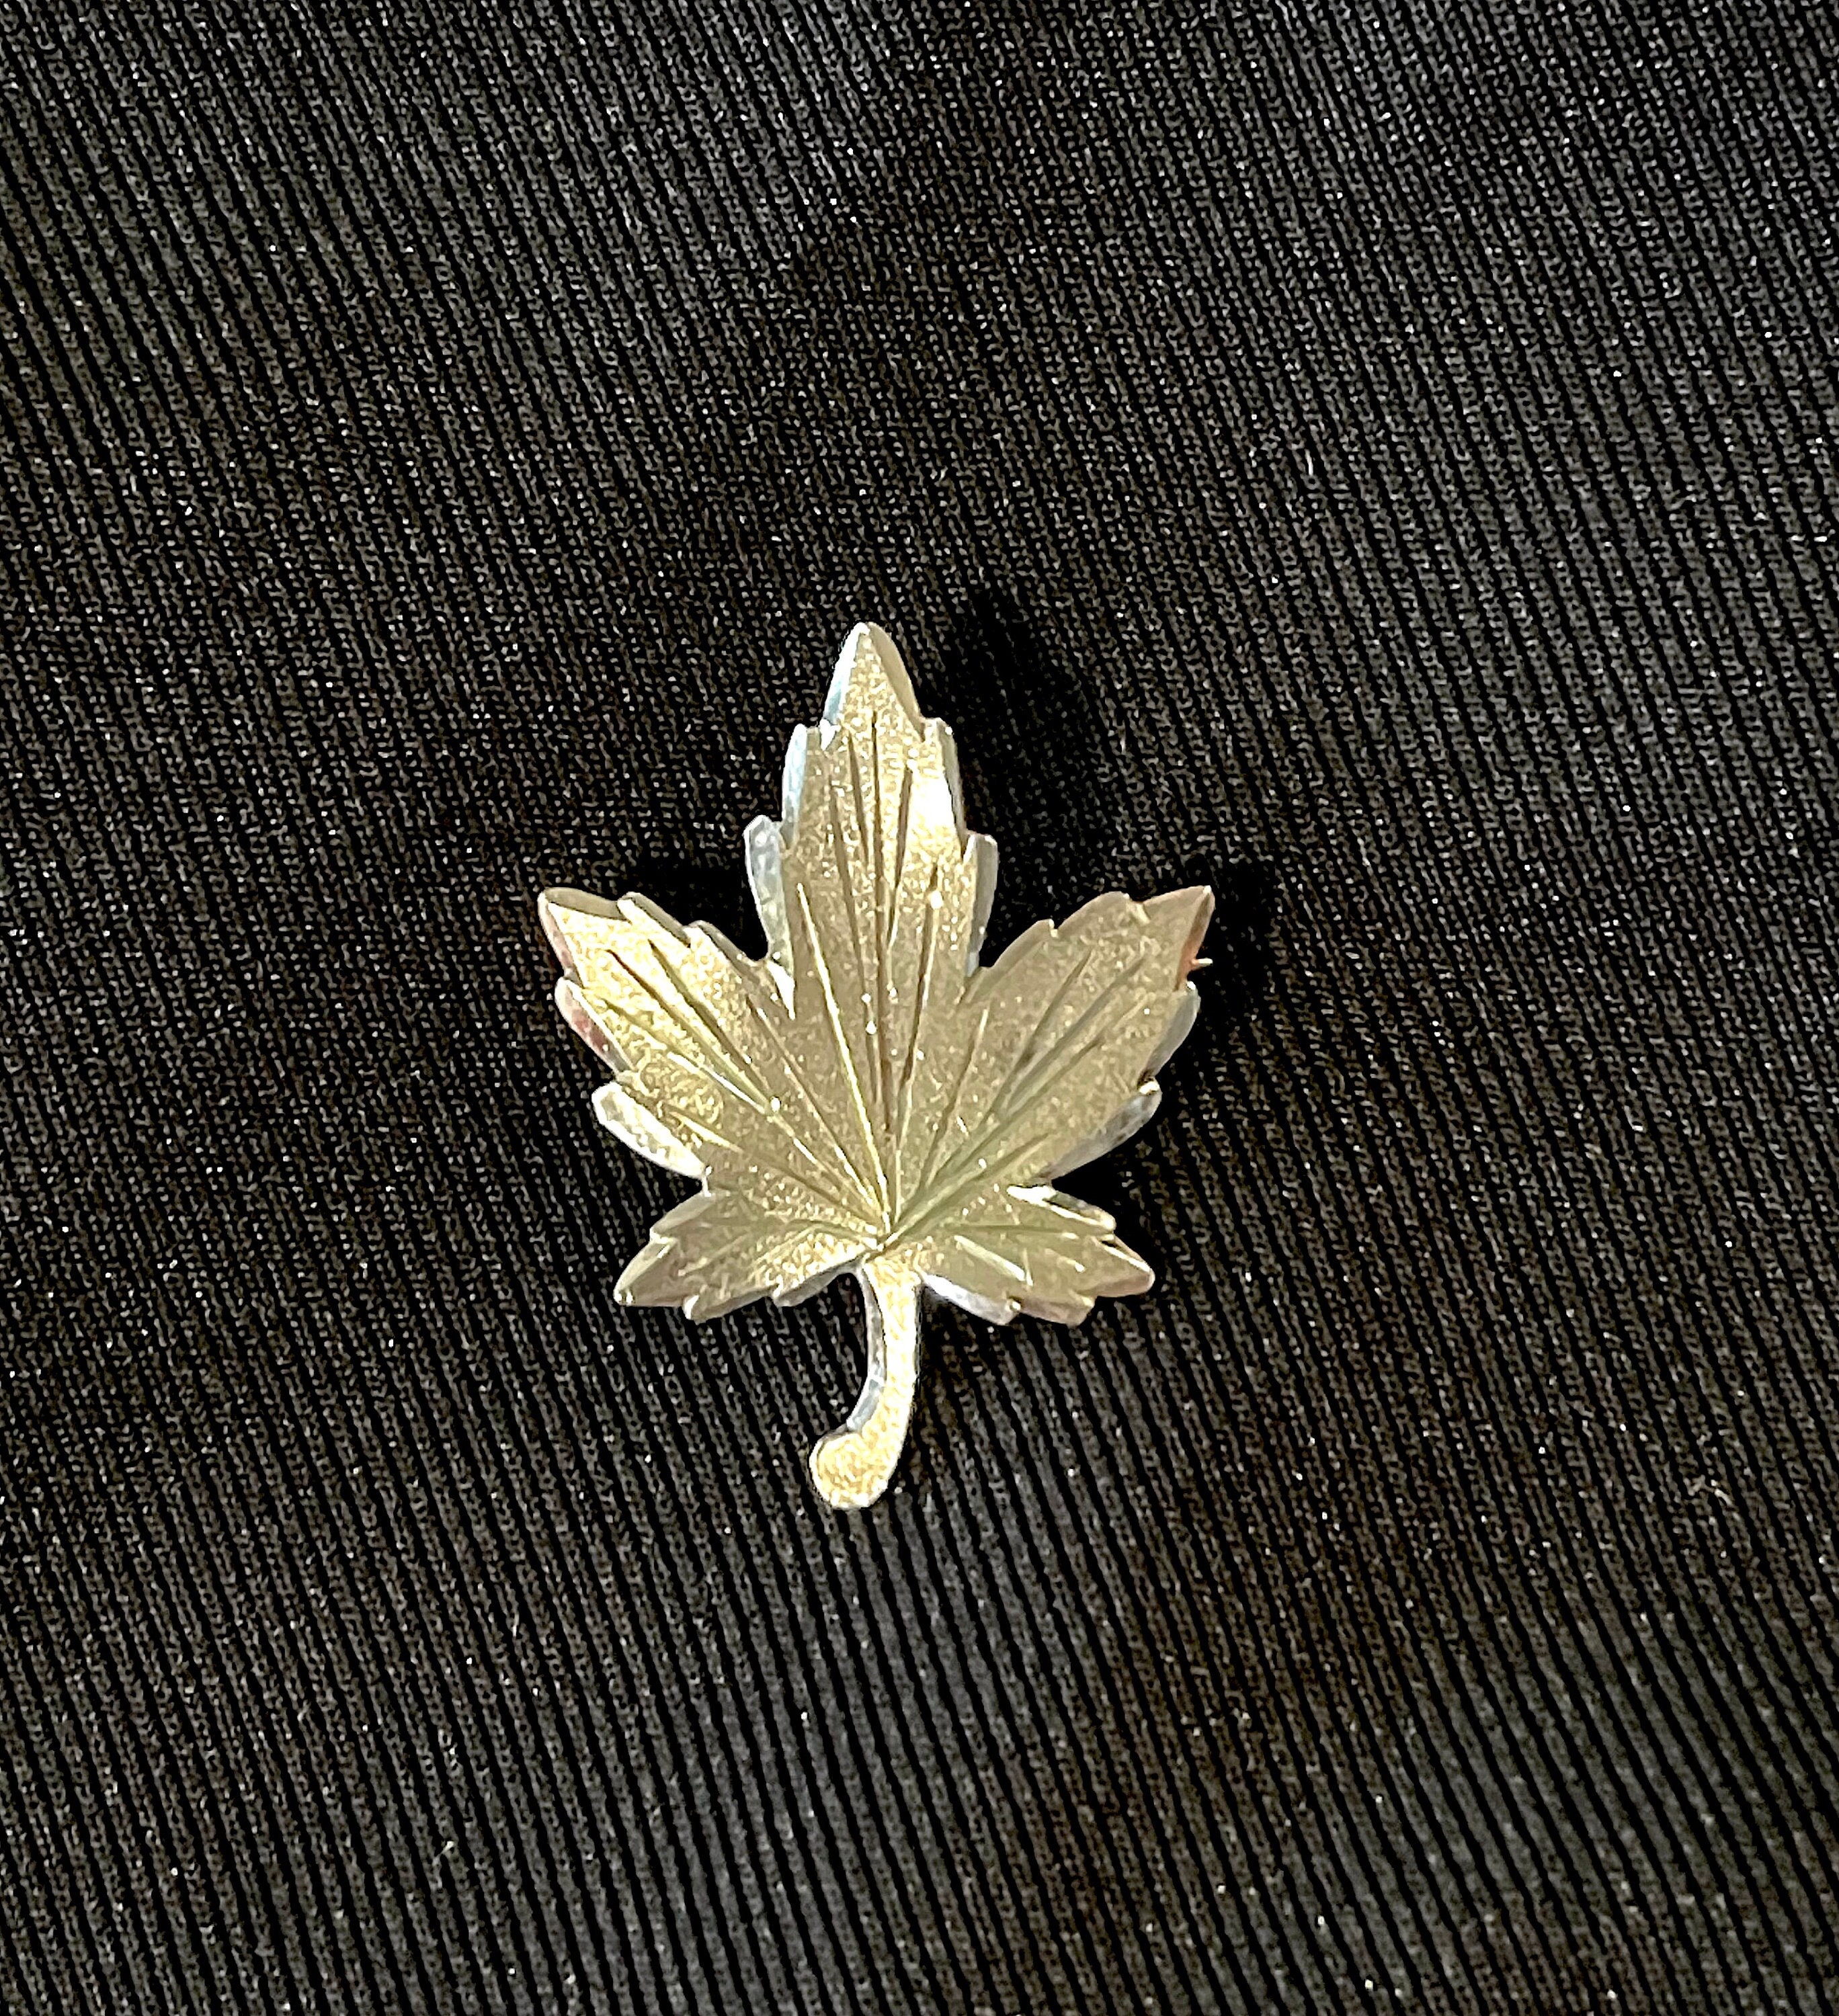 Maple Leaf Brooch Maple Leaf Hat Pin Maple Leaf Jewelry Leaves